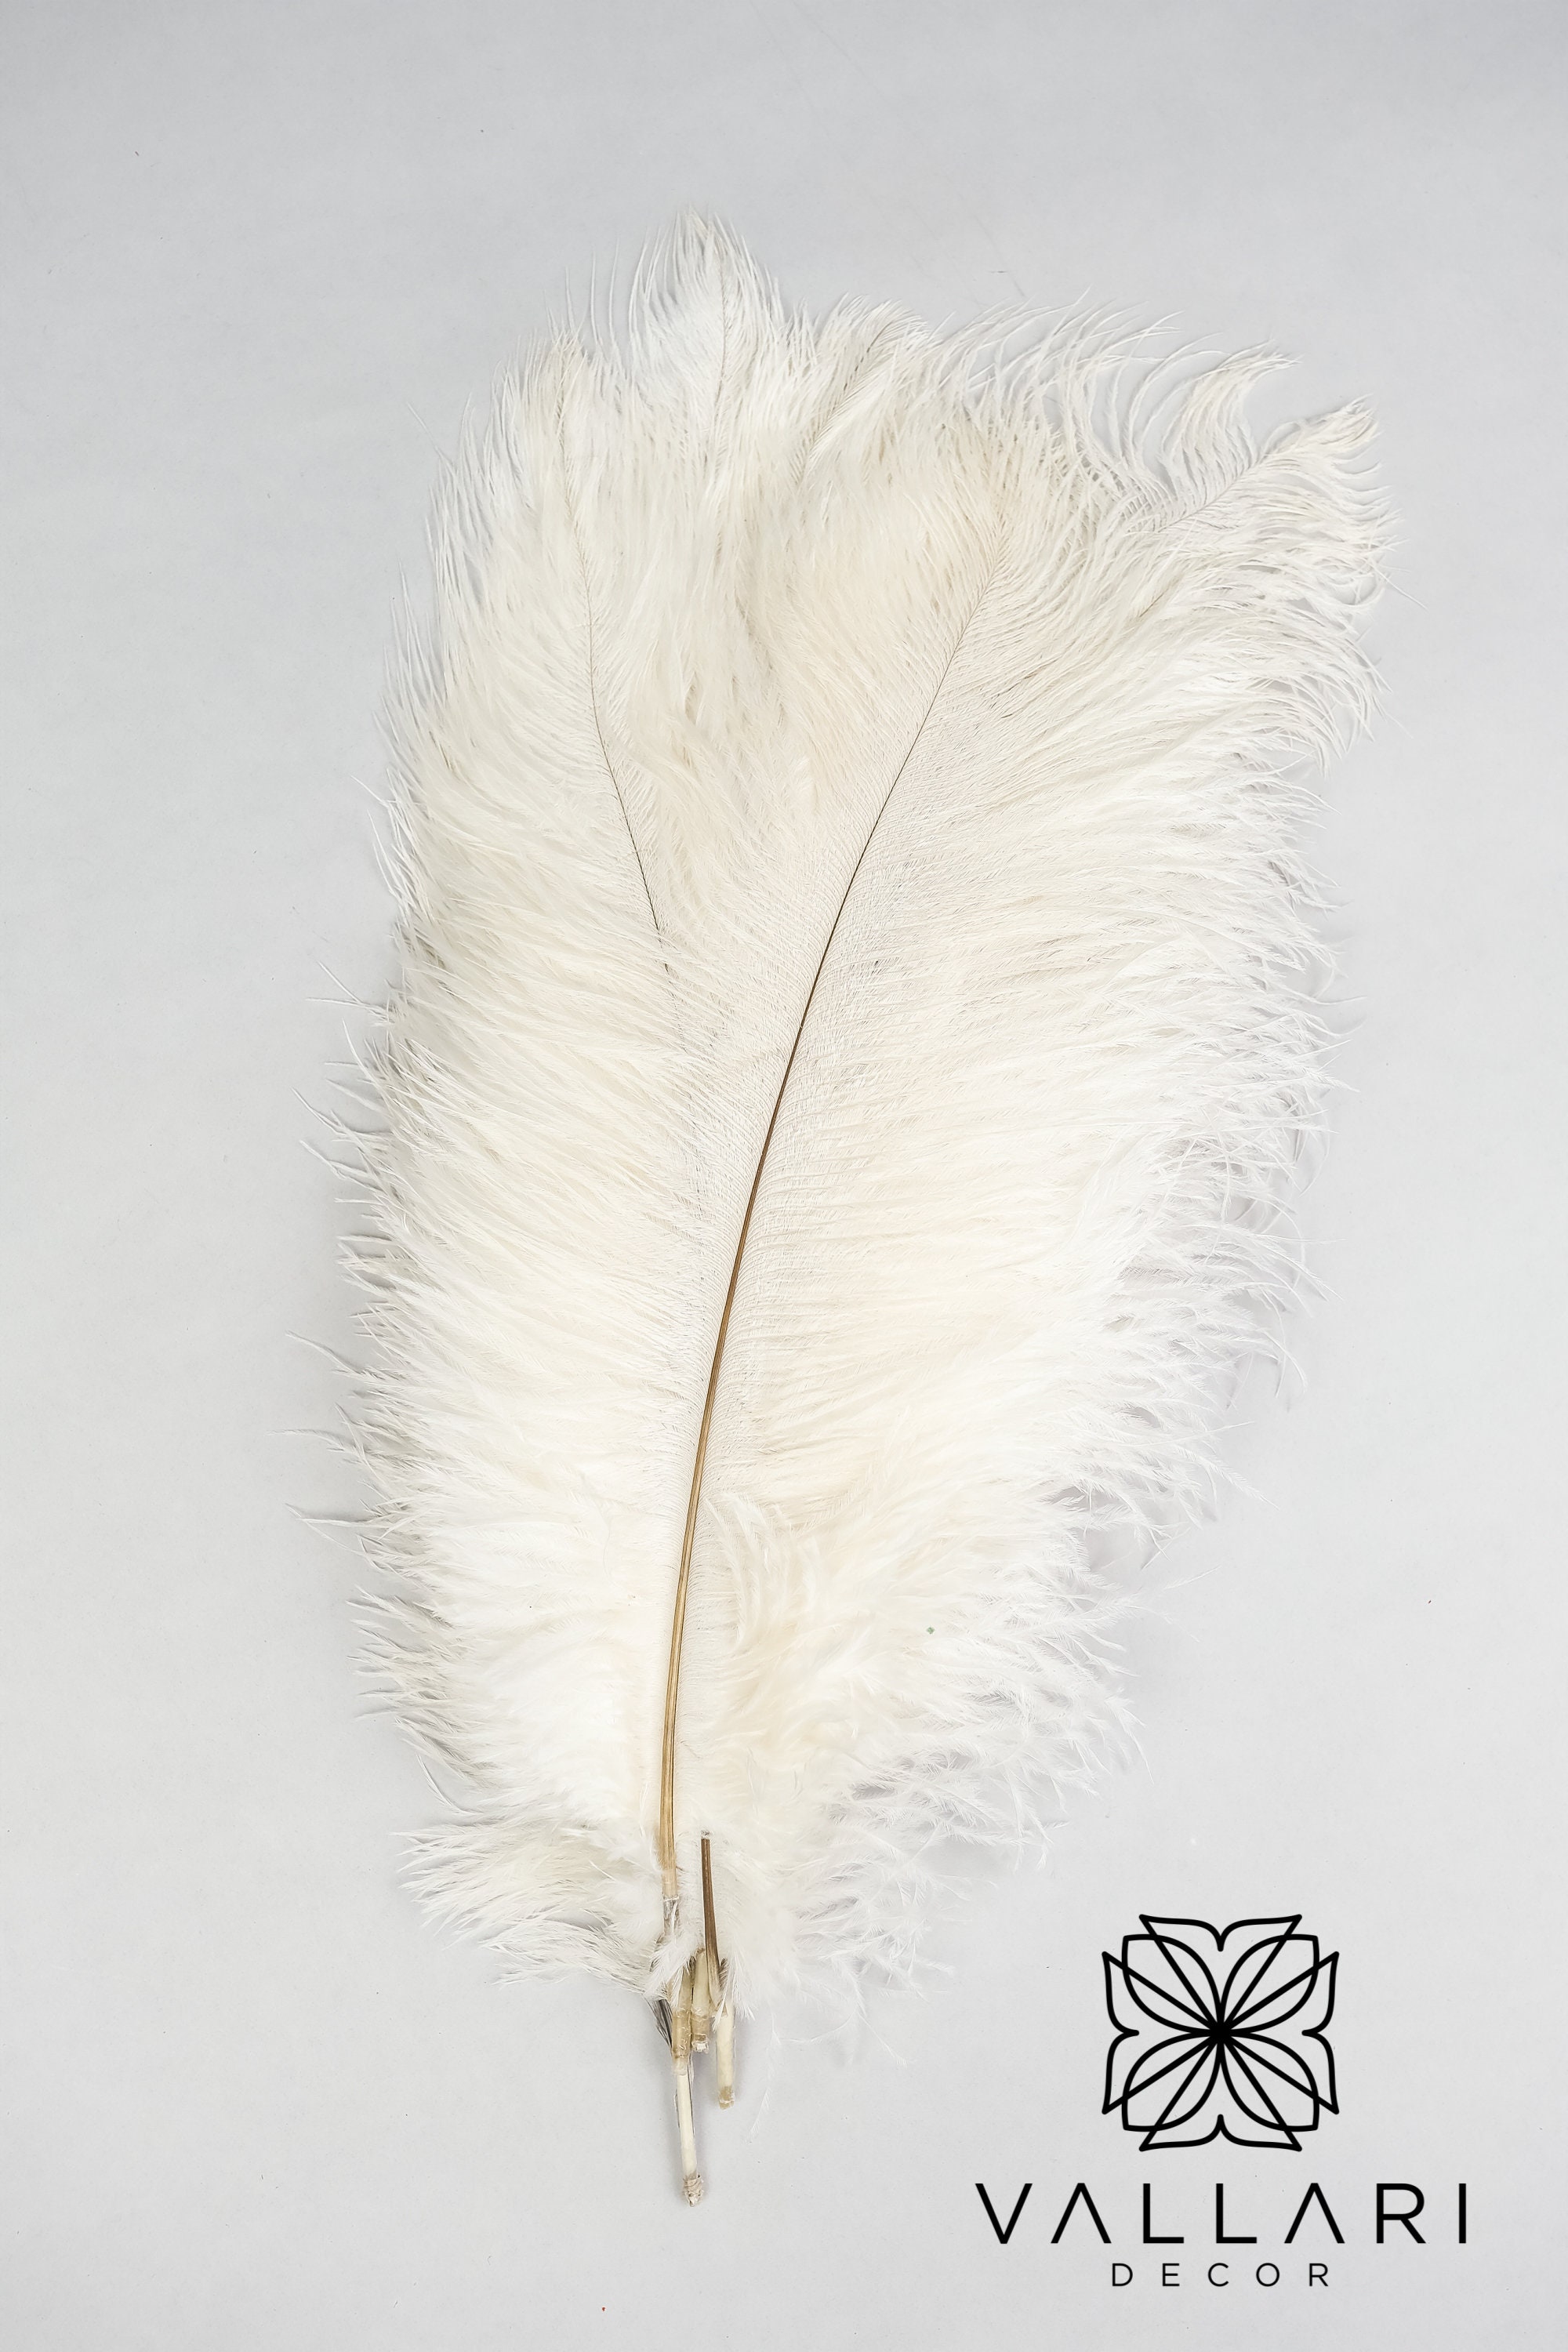 Ostrich Feather Spad Plumes 16-20 (Gold) for Sale Online